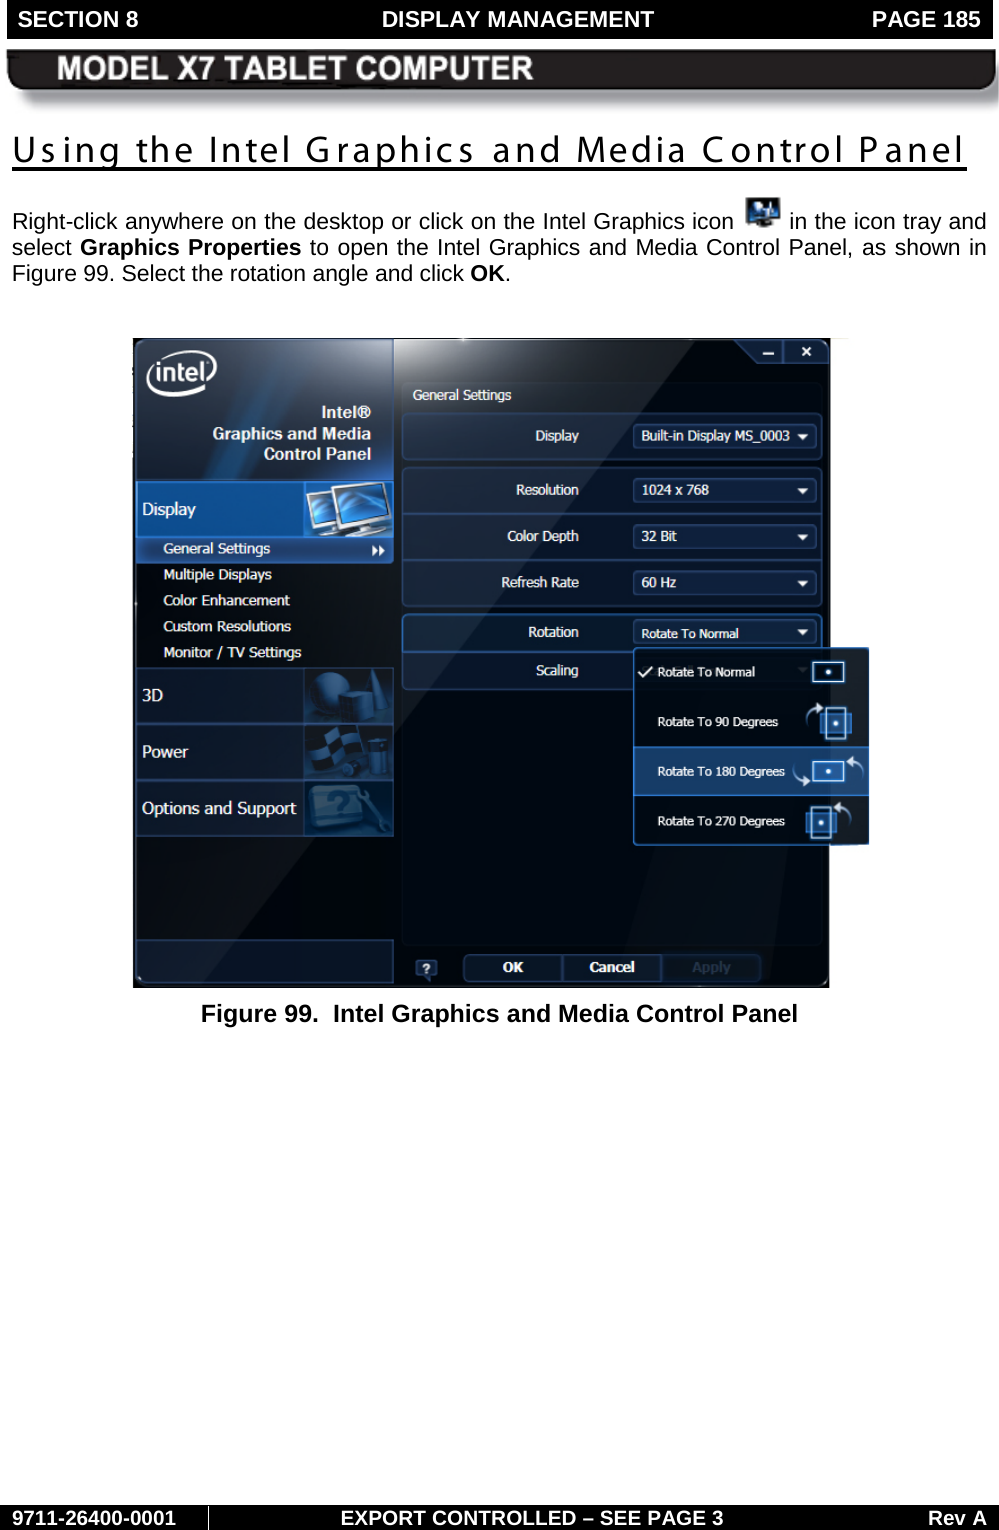 SECTION 8  DISPLAY MANAGEMENT  PAGE 185        9711-26400-0001 EXPORT CONTROLLED – SEE PAGE 3 Rev A Us ing the Intel Graphics and Media Control Panel Right-click anywhere on the desktop or click on the Intel Graphics icon   in the icon tray and select Graphics Properties to open the Intel Graphics and Media Control Panel, as shown in Figure 99. Select the rotation angle and click OK.   Figure 99.  Intel Graphics and Media Control Panel    